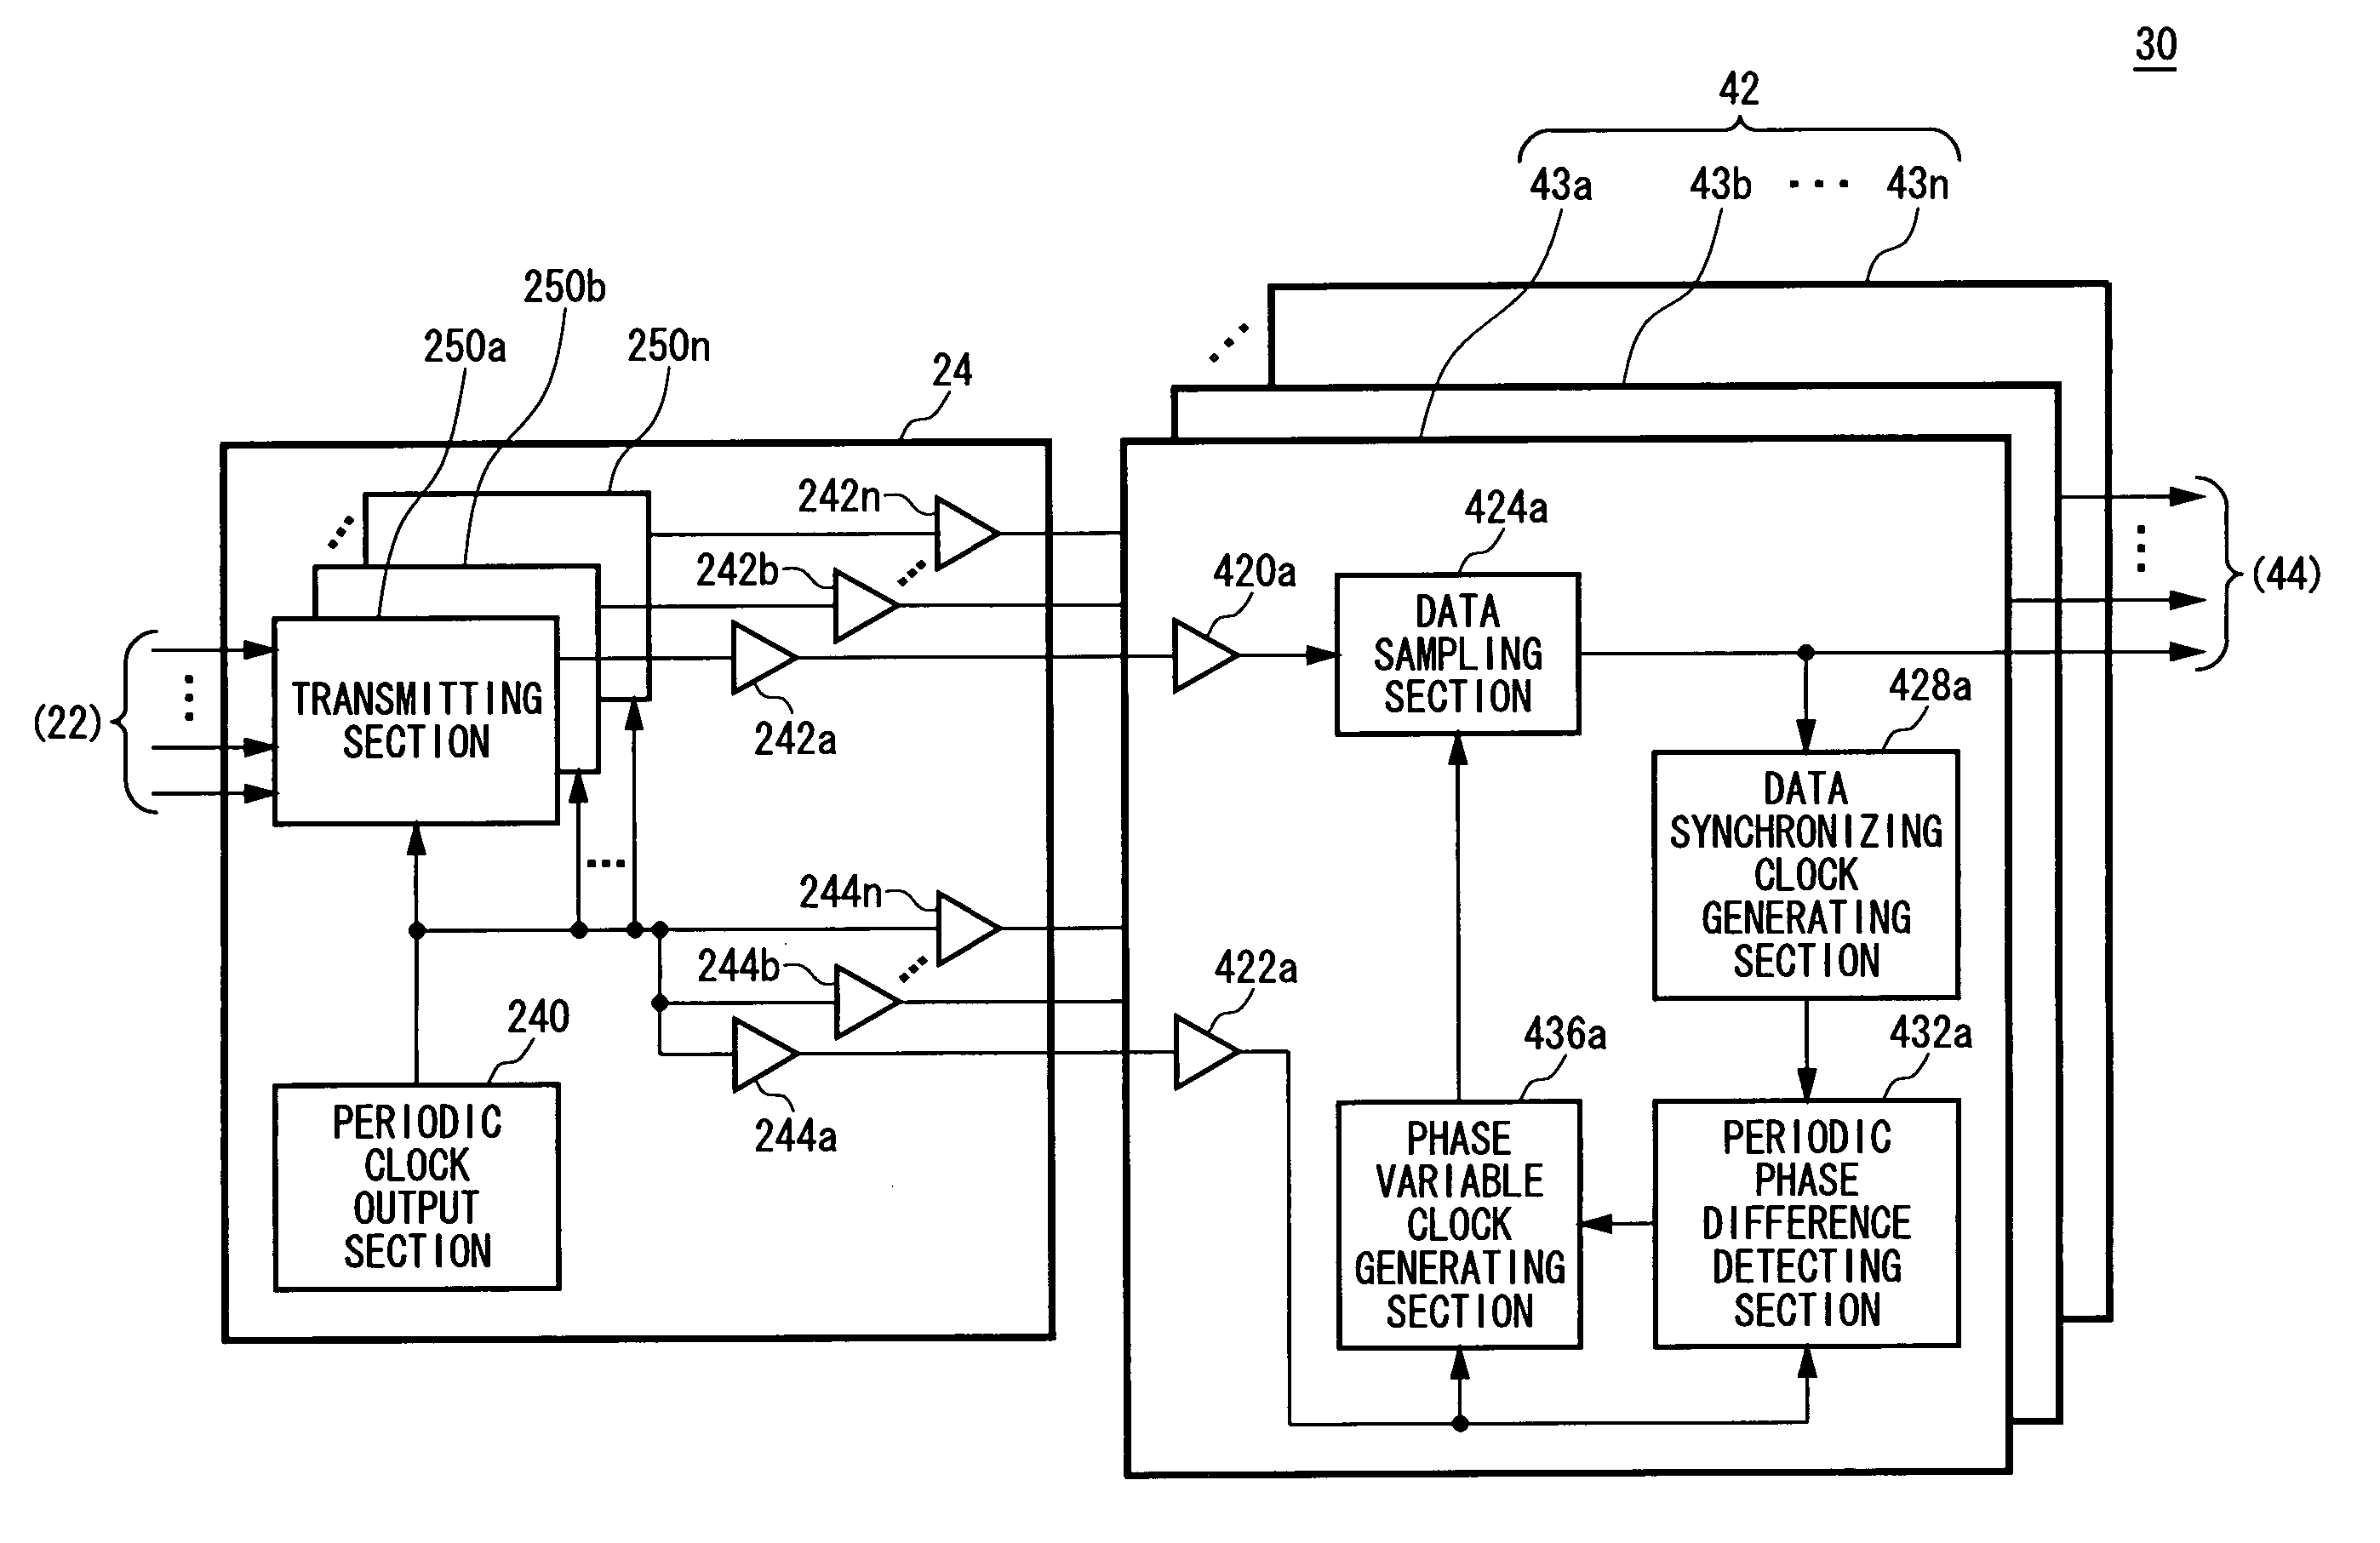 Transmission system, signal receiver, test apparatus and test head